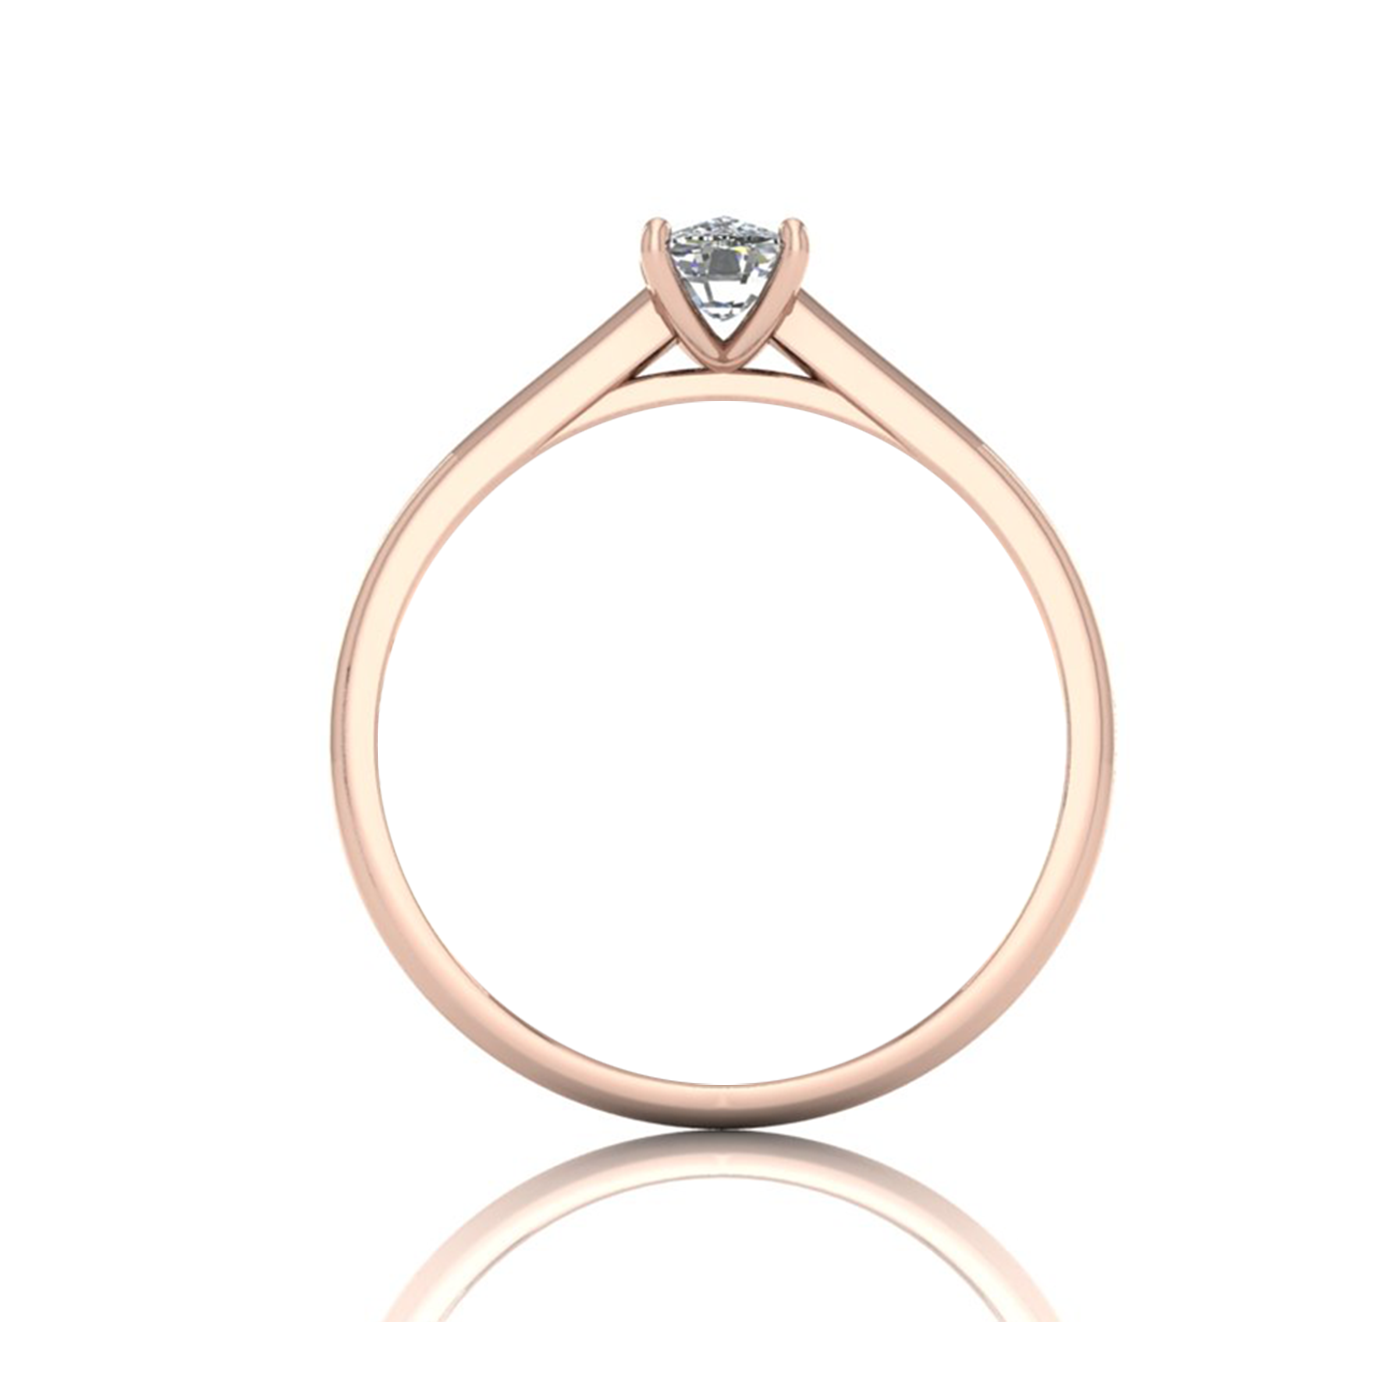 18k rose gold 0,80 ct 4 prongs solitaire elongated cushion cut diamond engagement ring with whisper thin band Photos & images